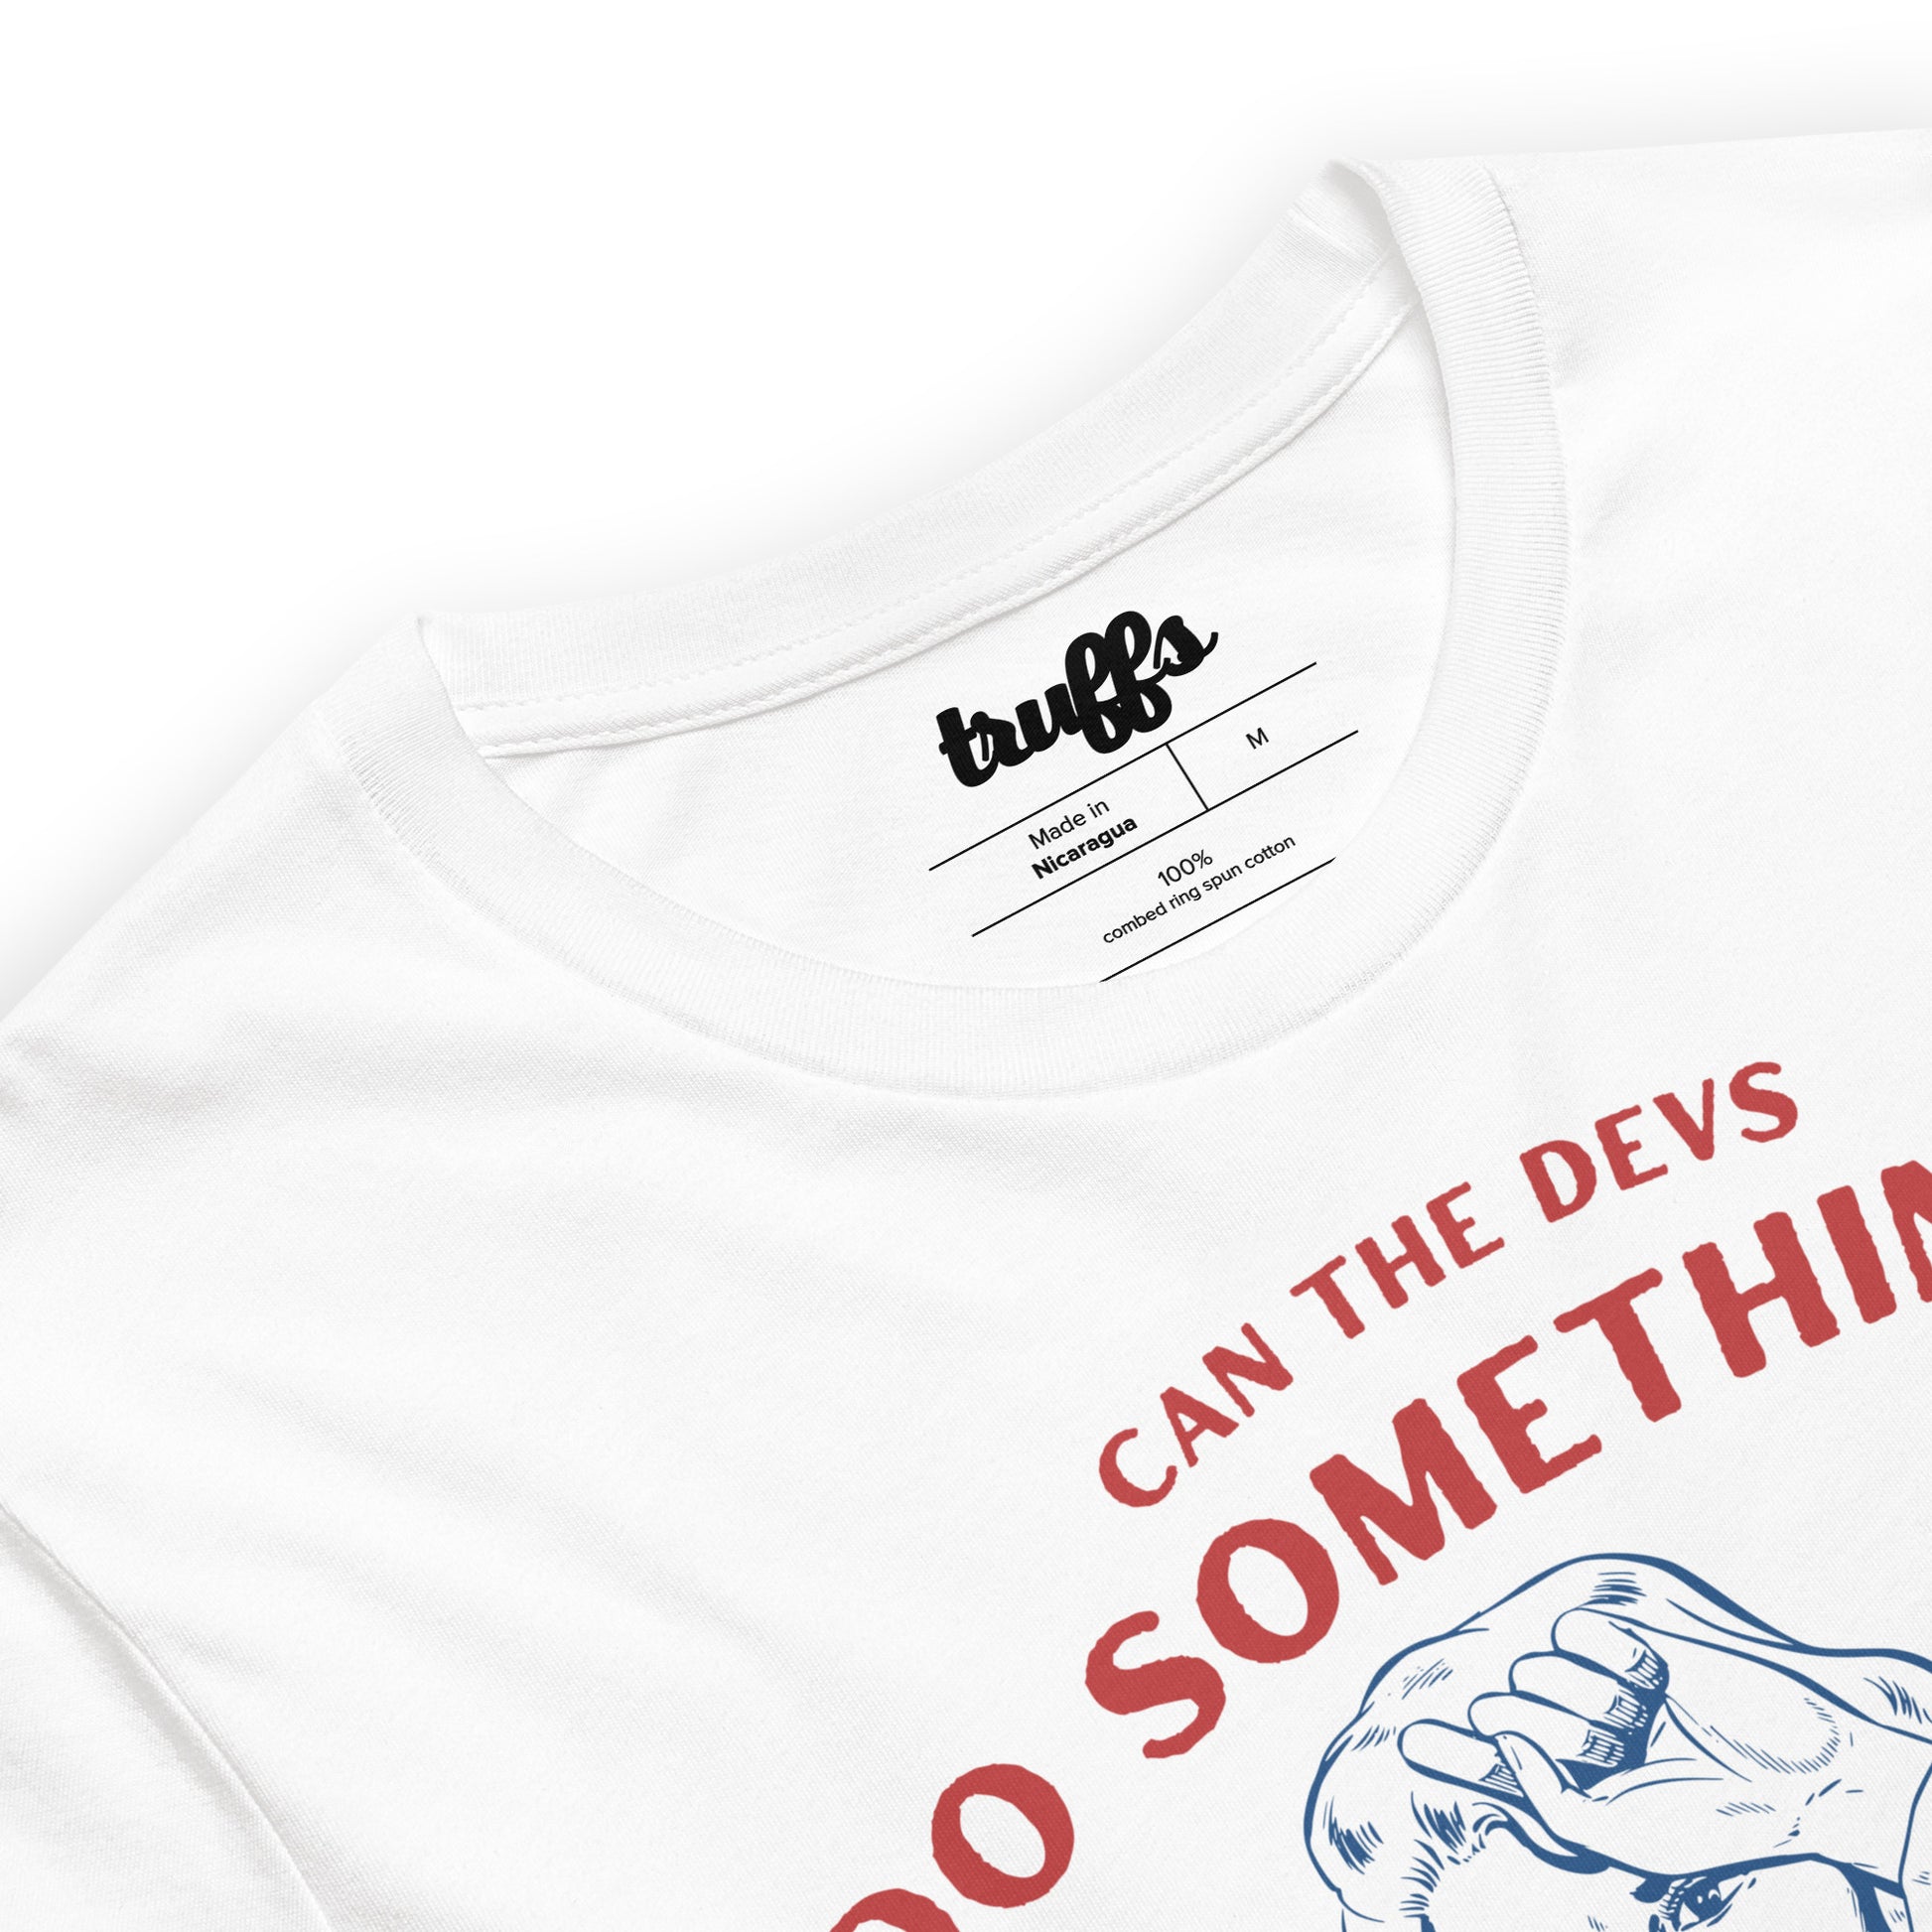 Can The Devs Do Something NFT T-Shirt Label